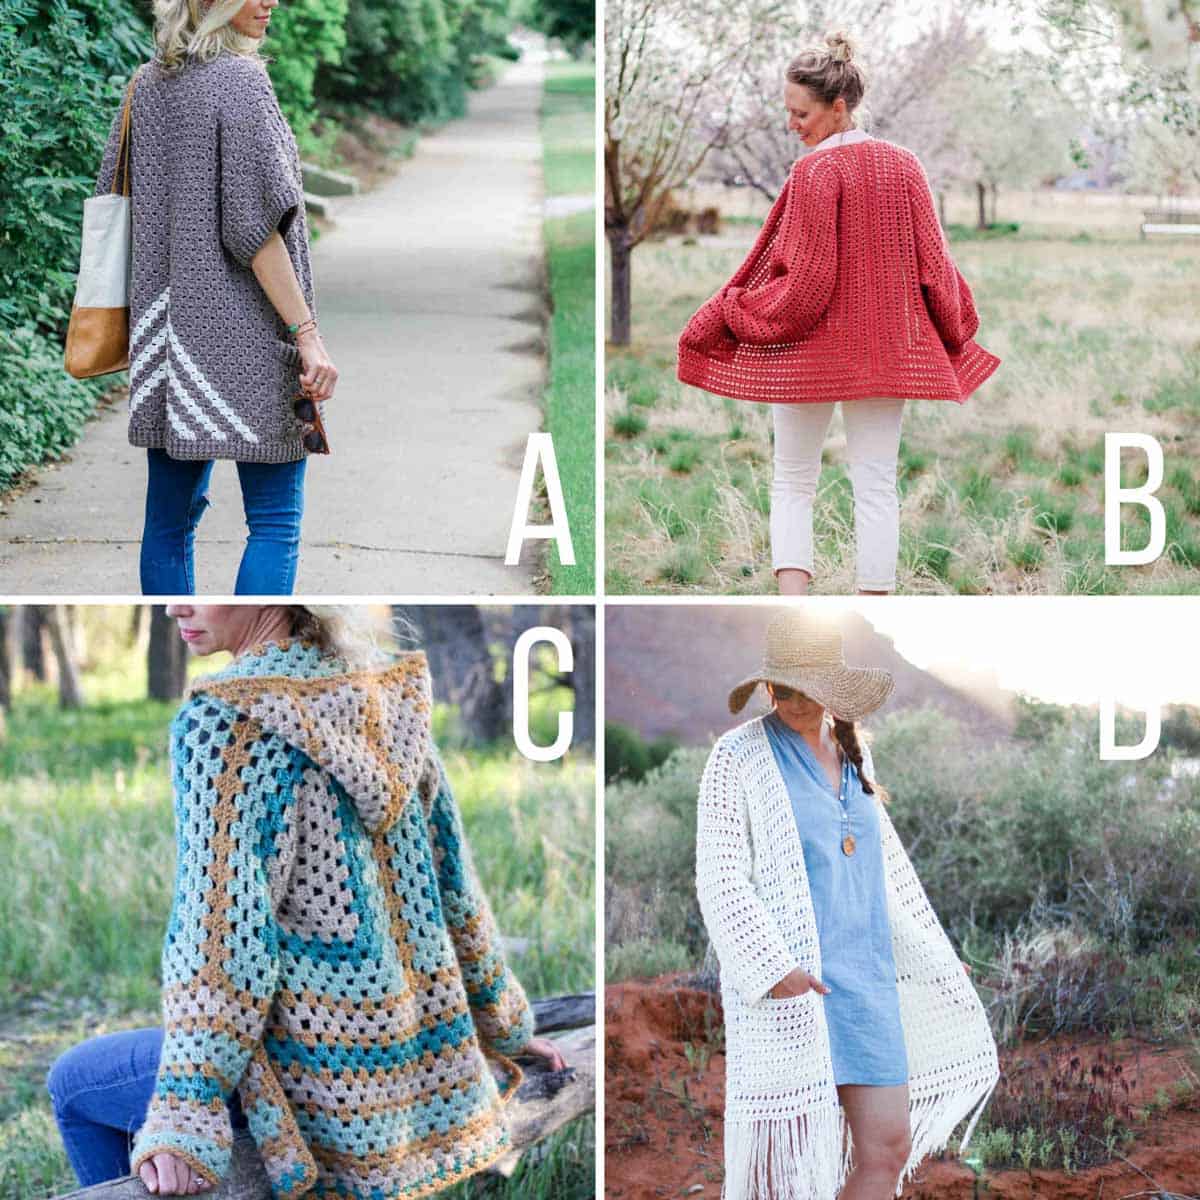 Grid of four free crochet cardigan patterns. One is a corner to corner crochet cardigan, one is a lightweight spring cardigan with bishop sleeves, one is a hooded crochet cardigan made from hexagons and one is a long crochet cardigan with fringe.